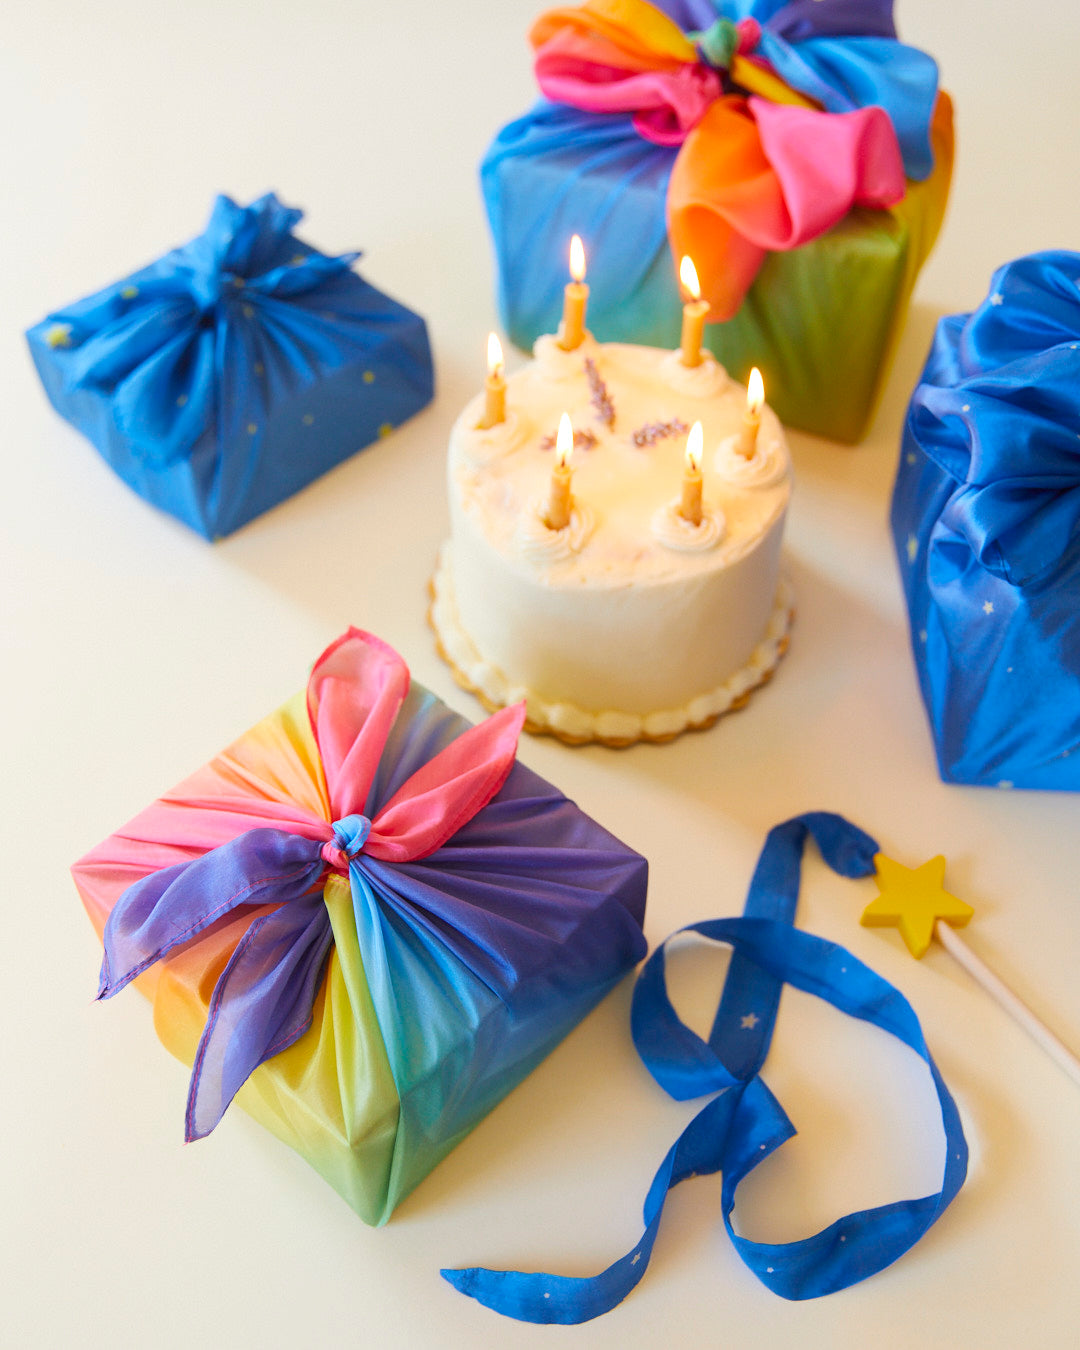 Party Favors Packs